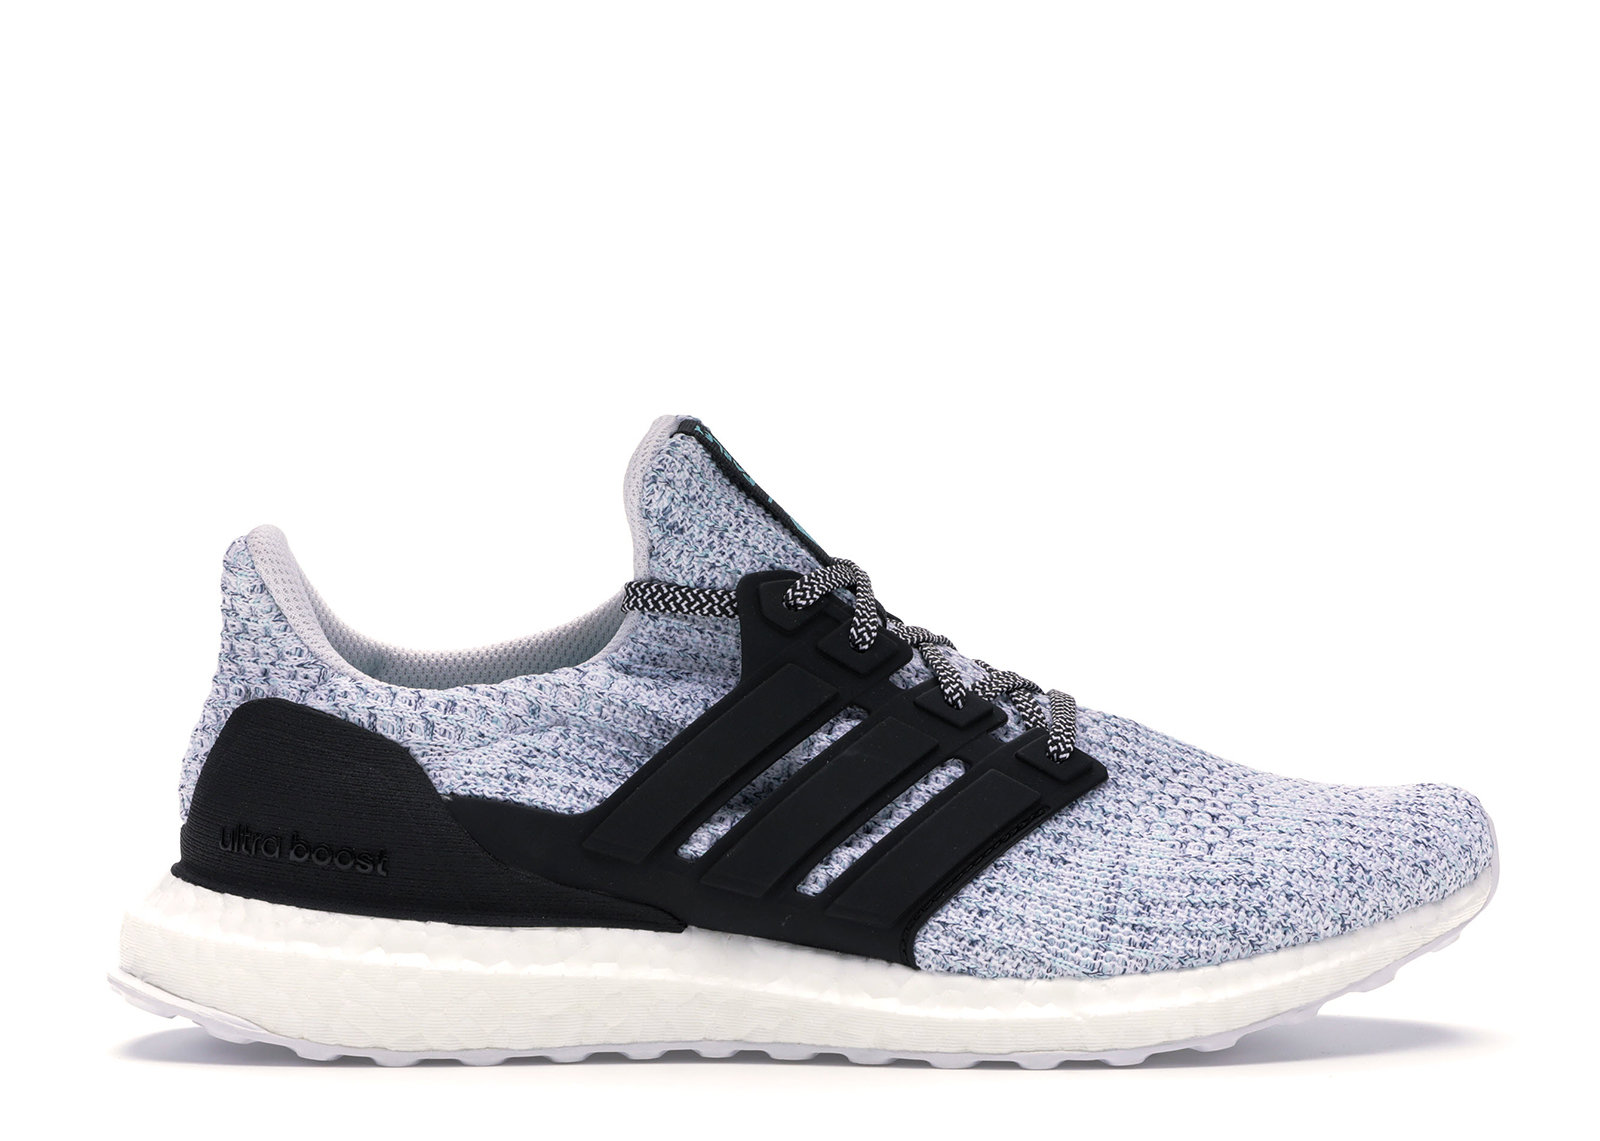 adidas Ultra Boost 4.0 Parley White 